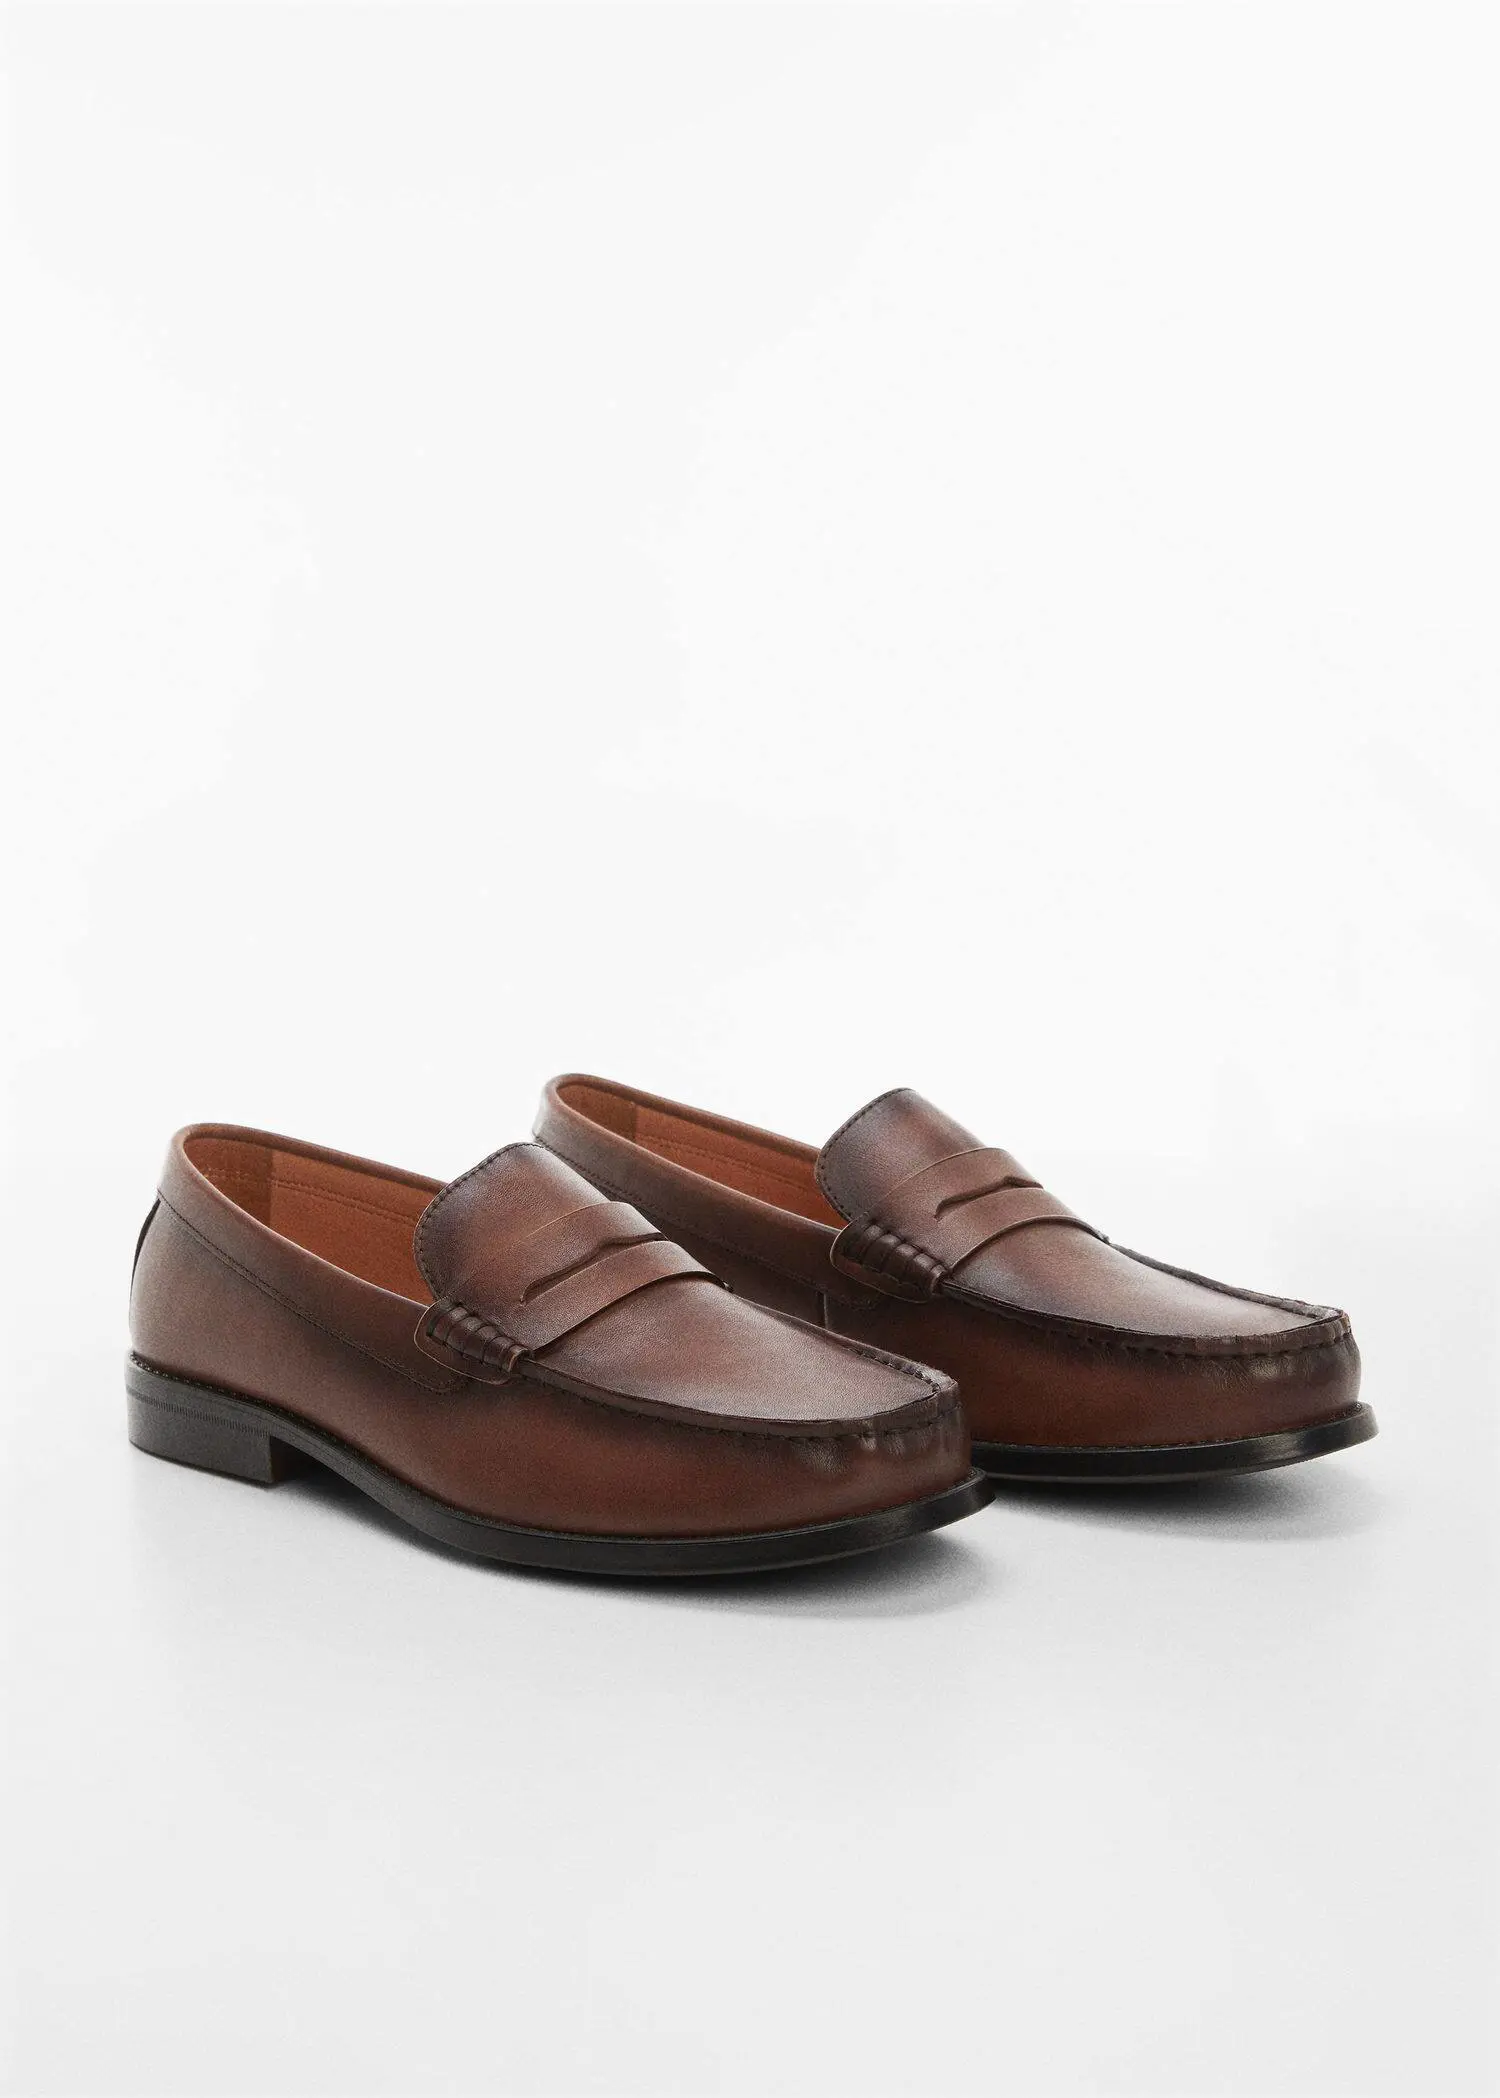 Mango Leather penny loafers. a pair of brown loafers on top of a white surface. 